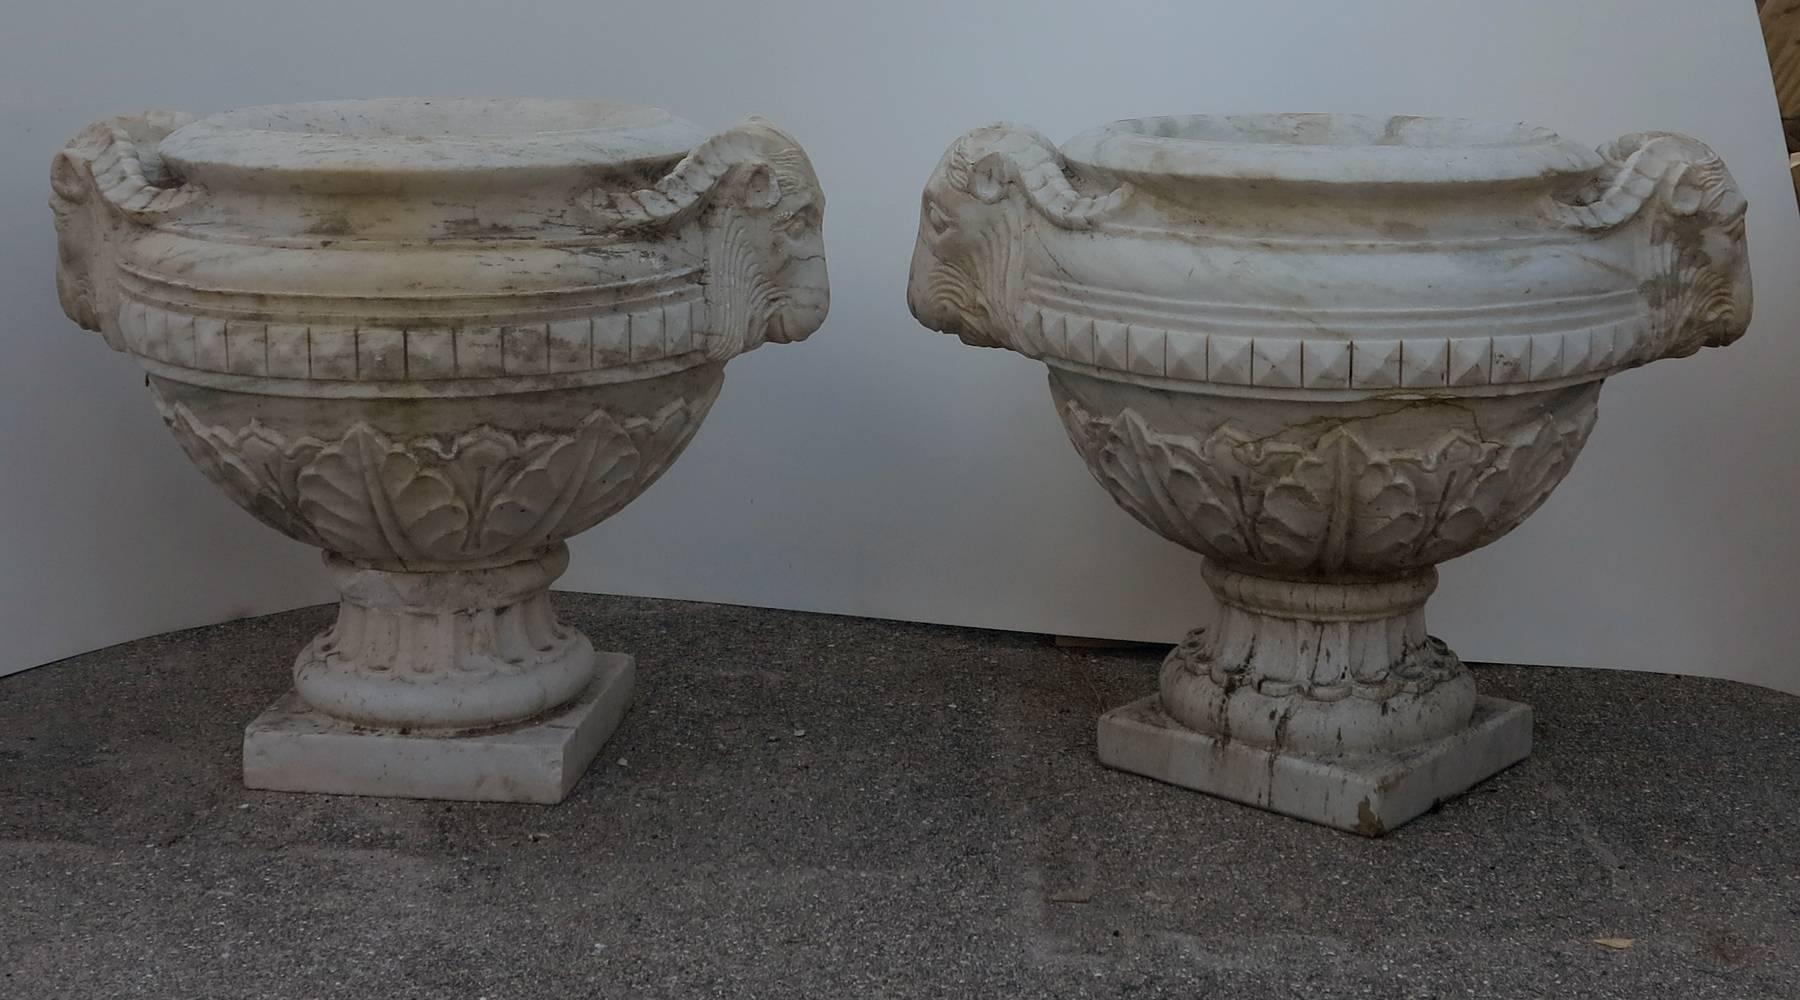 Large beautifully carved 19th century marble urns. Statement piece to a grand entryway. Condition consistent with age and wear. Loss to one of the pedestal bases. See photo. Measures approximately 25